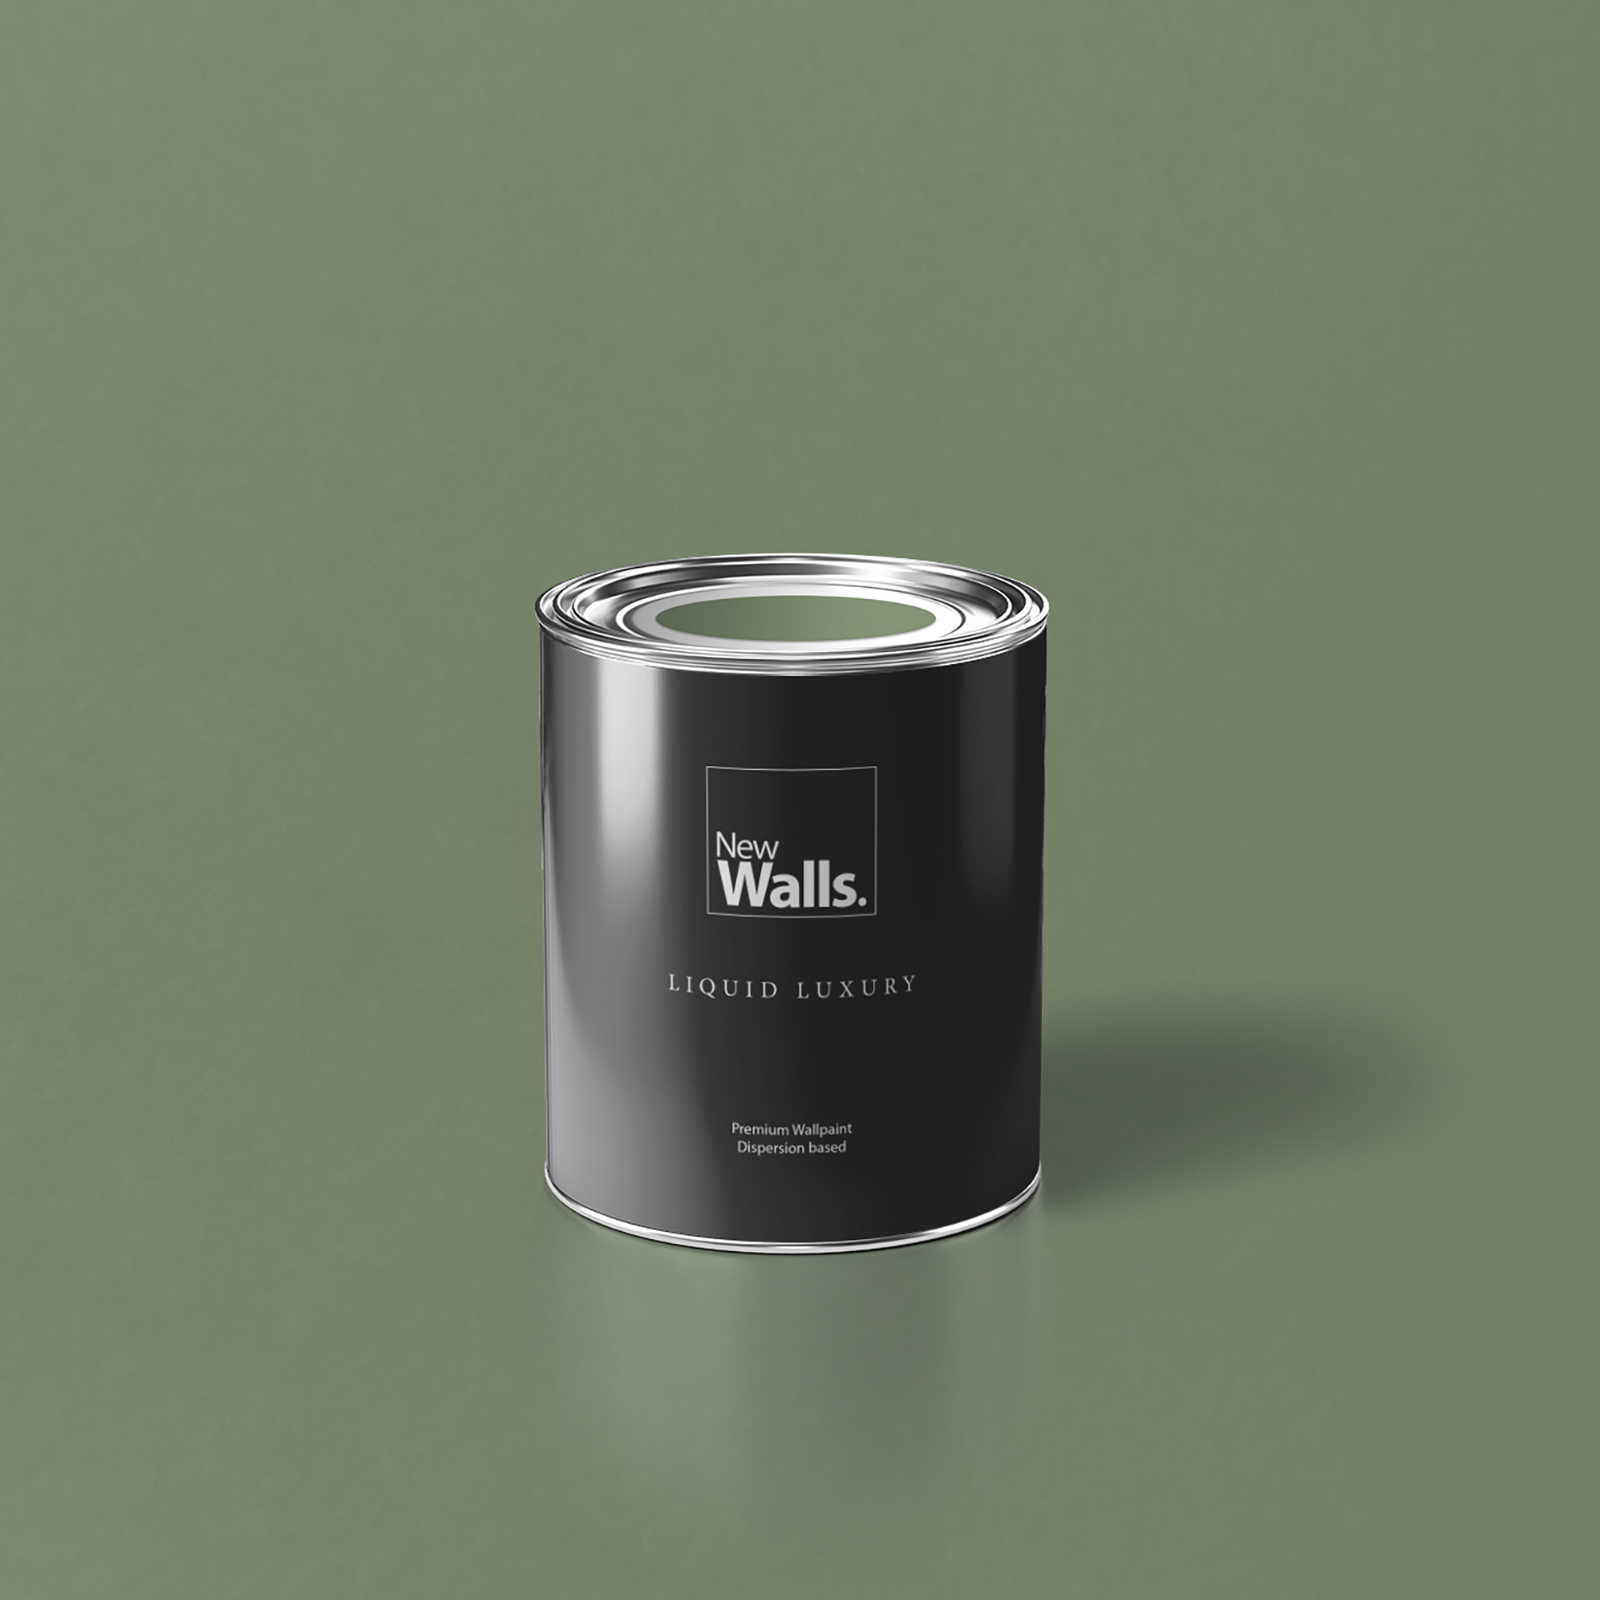         Premium Wall Paint Nature Olive Green »Gorgeous Green« NW503 – 1 litre
    